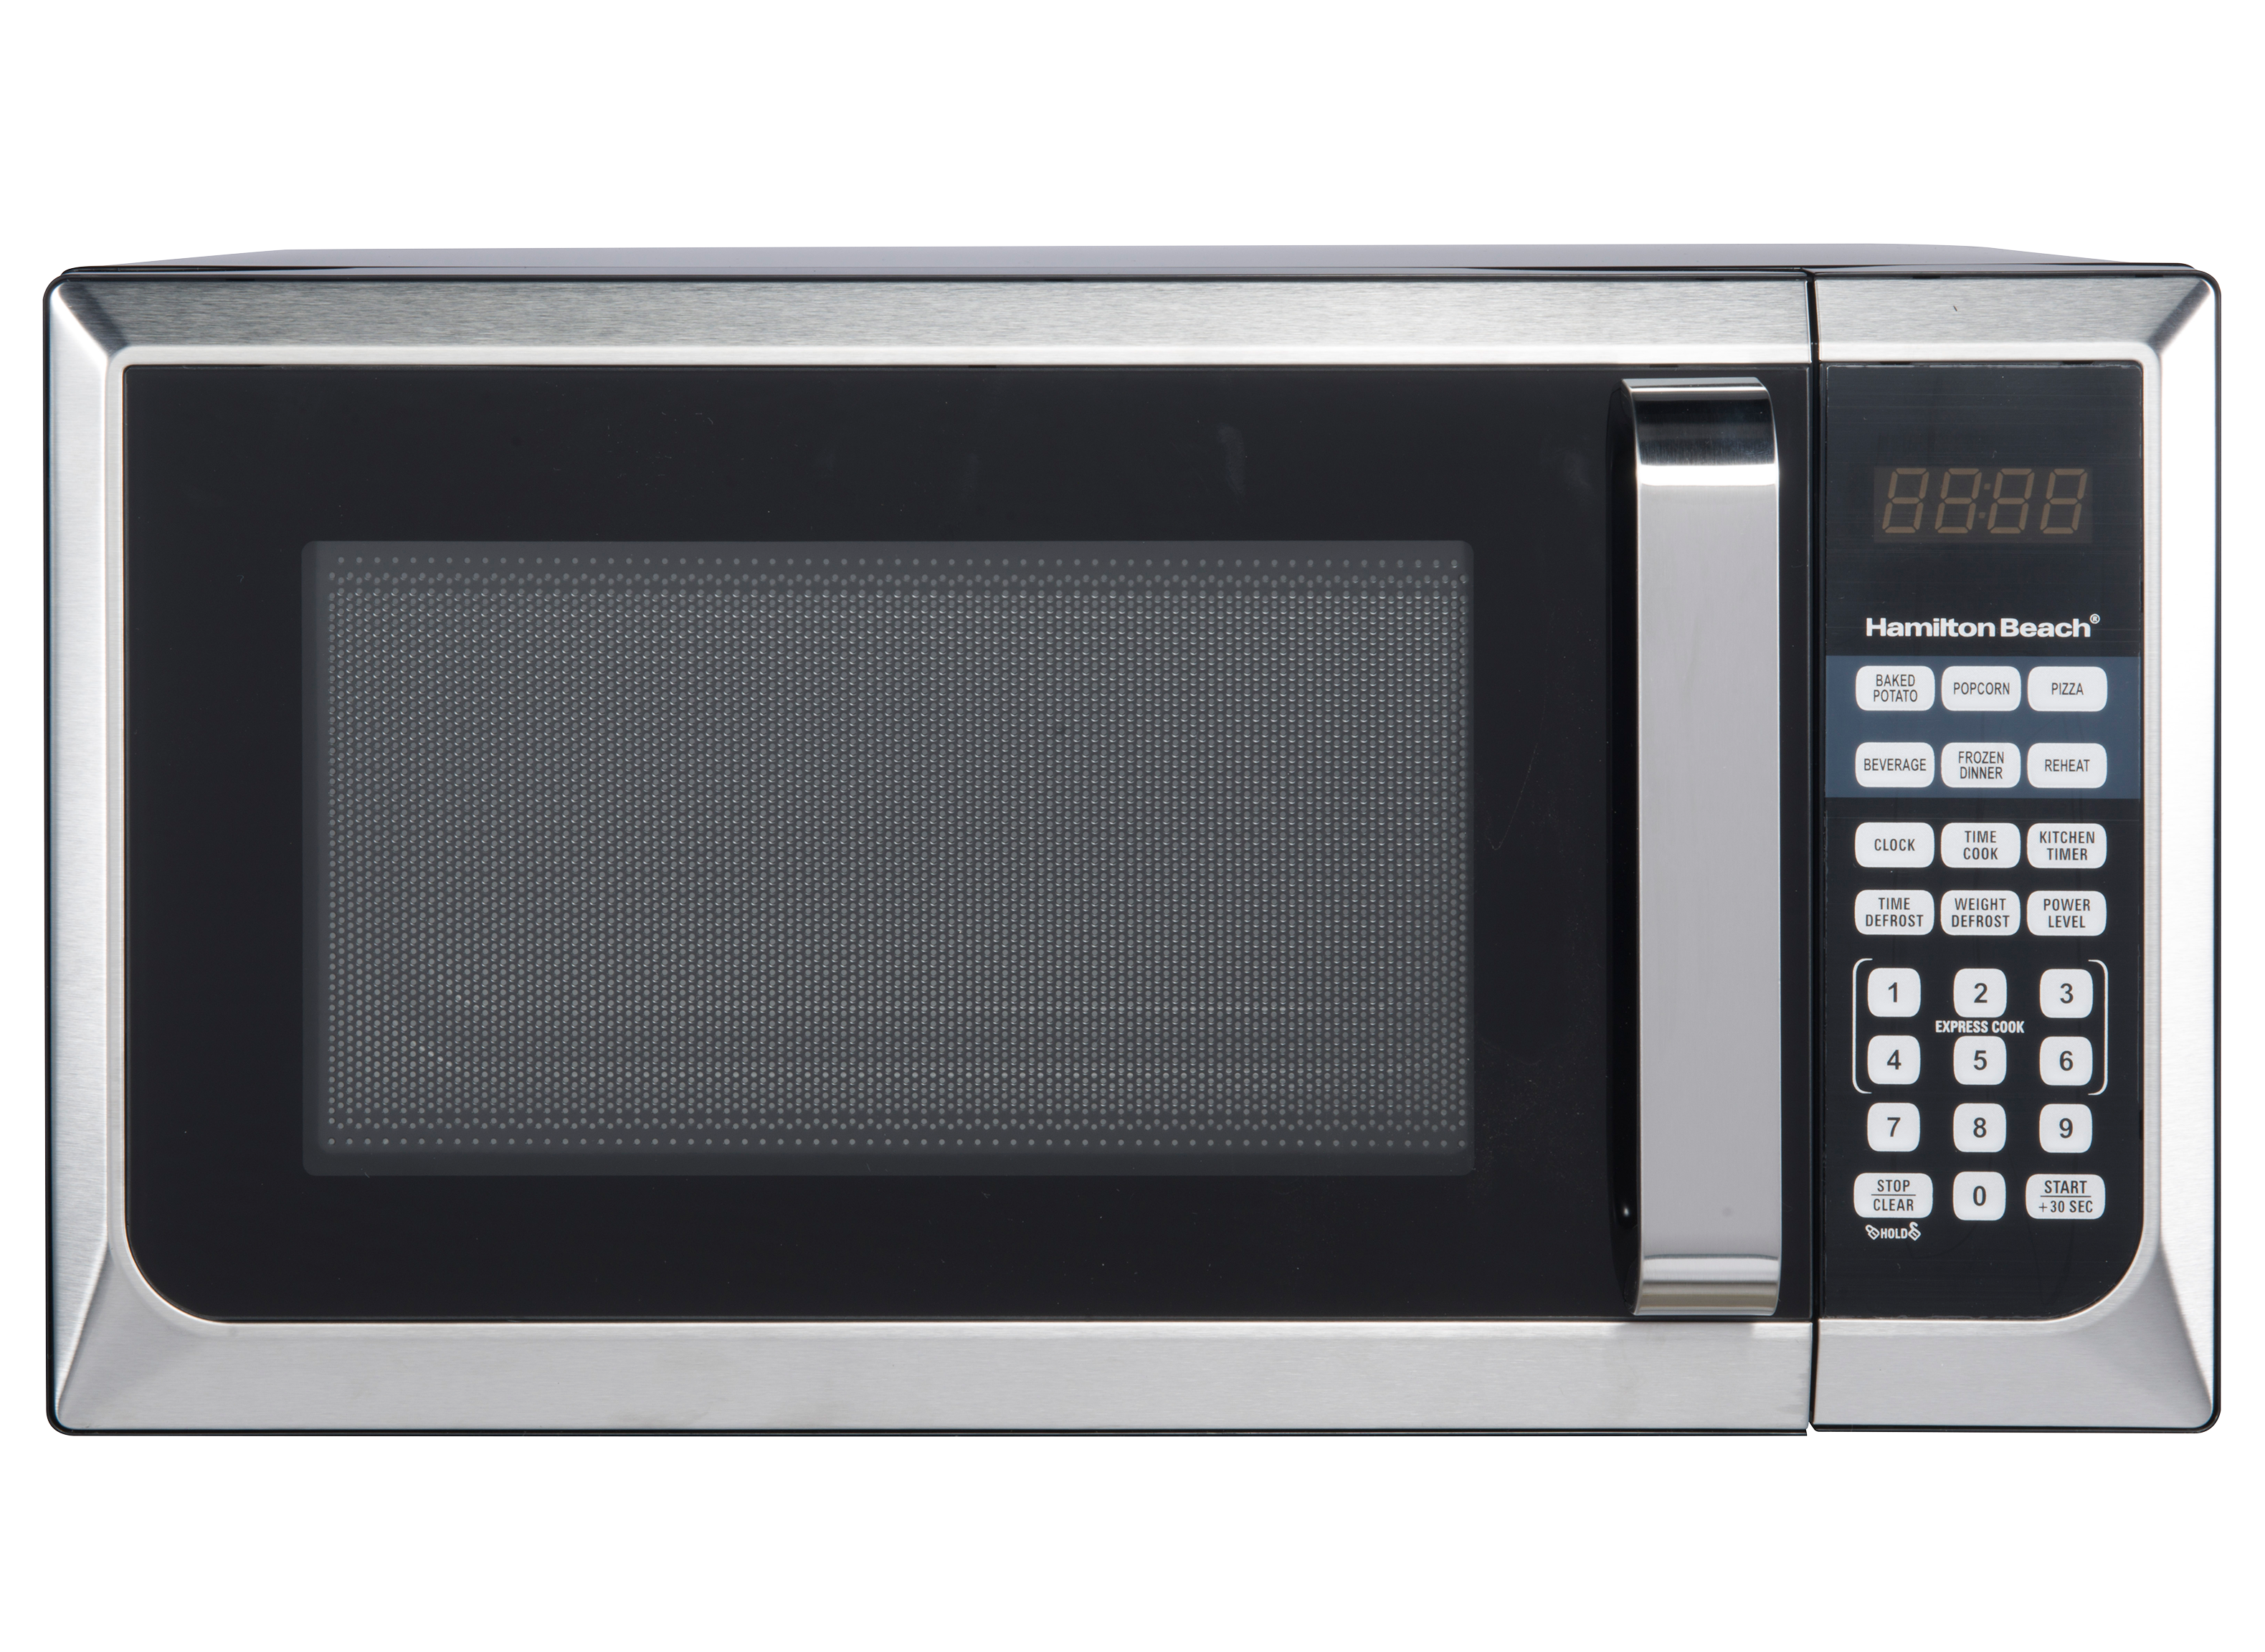 https://crdms.images.consumerreports.org/prod/products/cr/models/405083-midsized-countertop-microwaves-hamilton-beach-p90d23al-wr-10024623.png